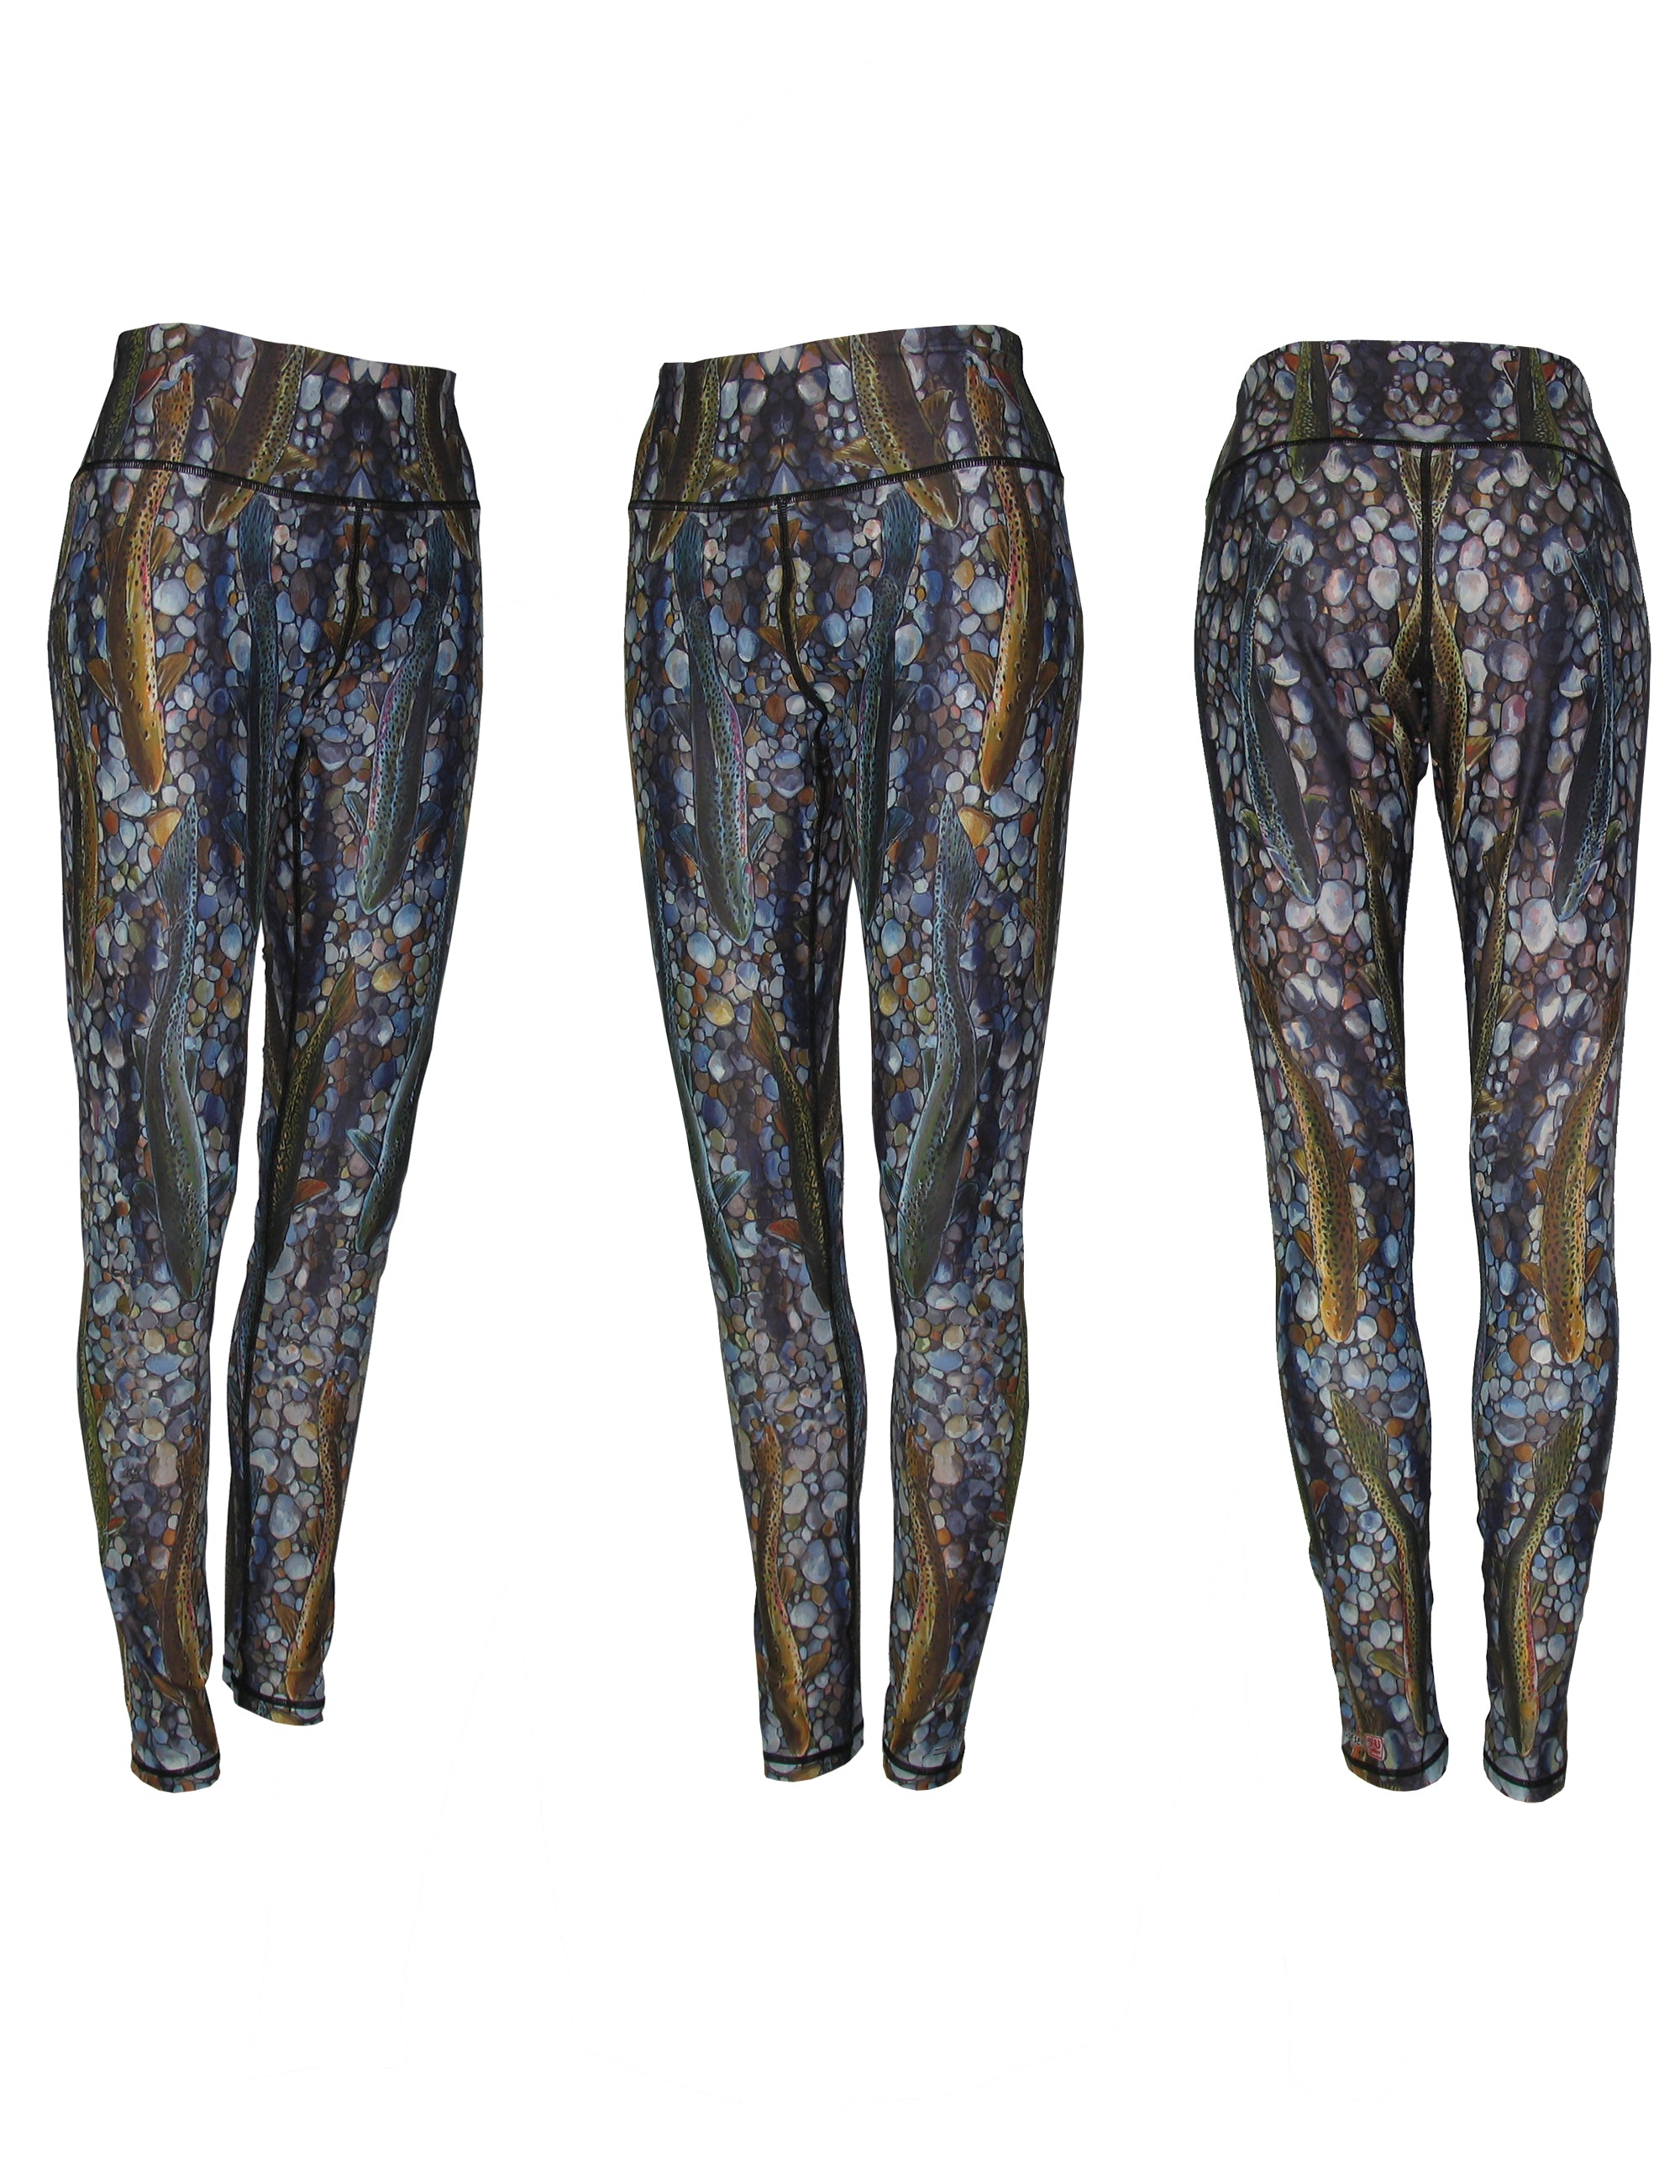 Brown Trout All Sport Leggings  Women's Fly Fishing Clothing - Cognito  Brands, Inc.